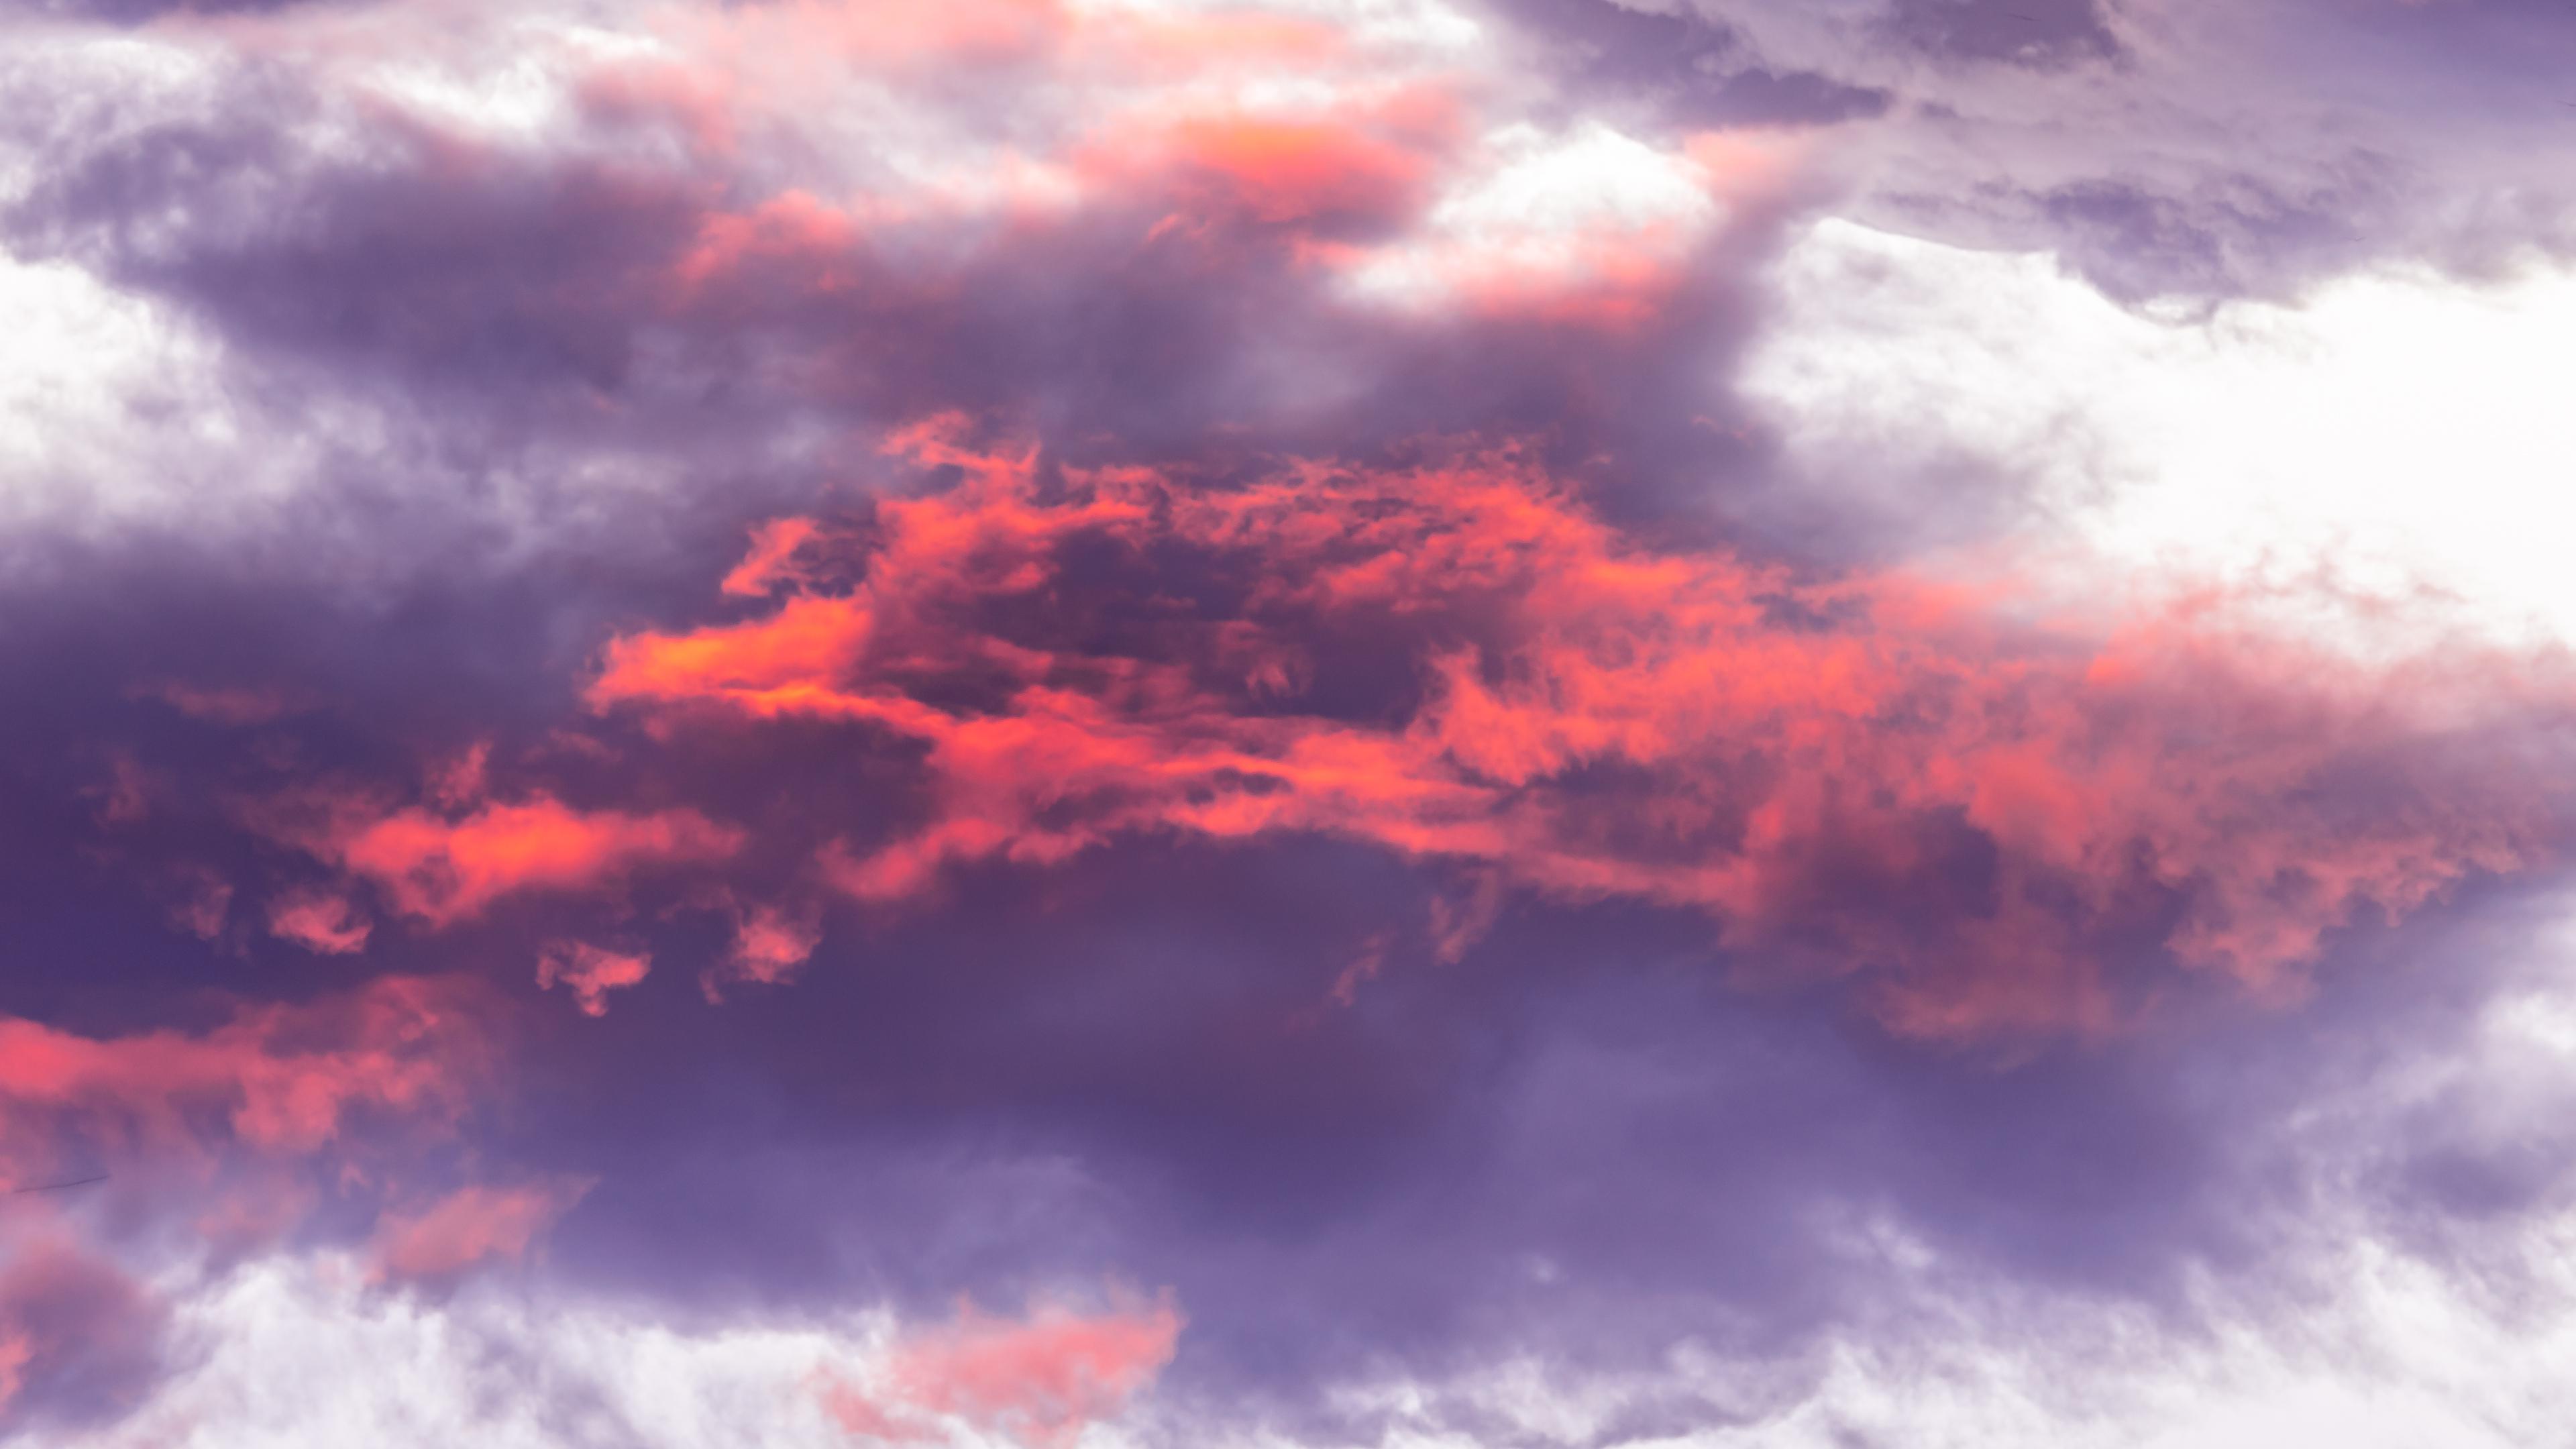 Cloud 4K wallpaper for your desktop or mobile screen free and easy to download